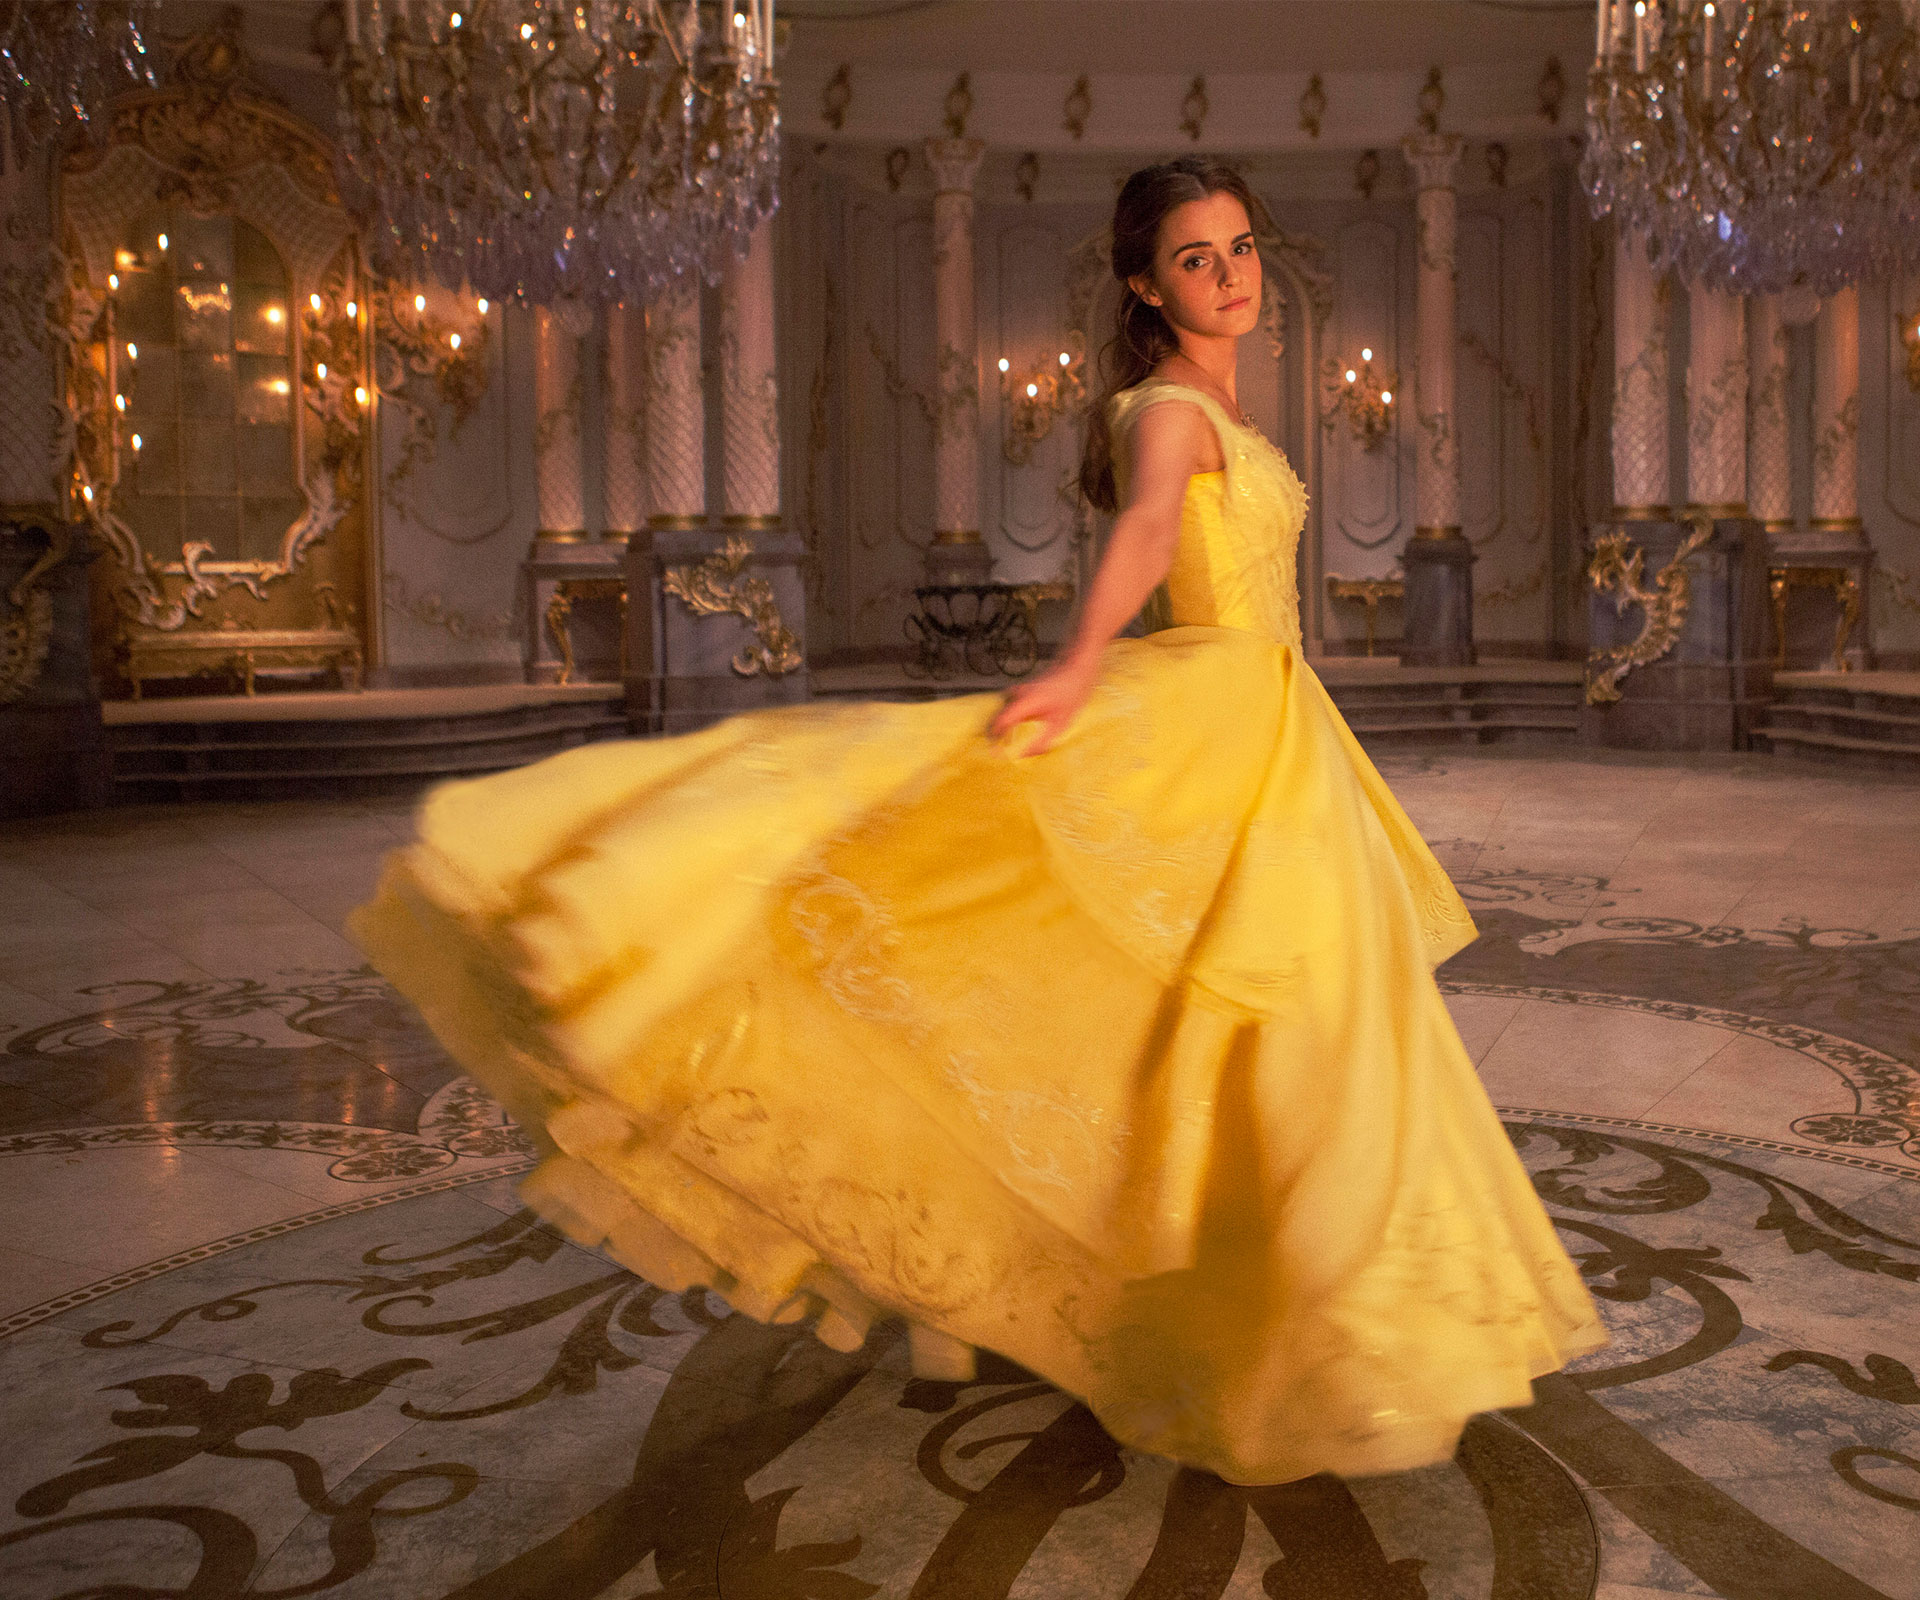 Win a Beauty and the Beast double pass and prize pack!